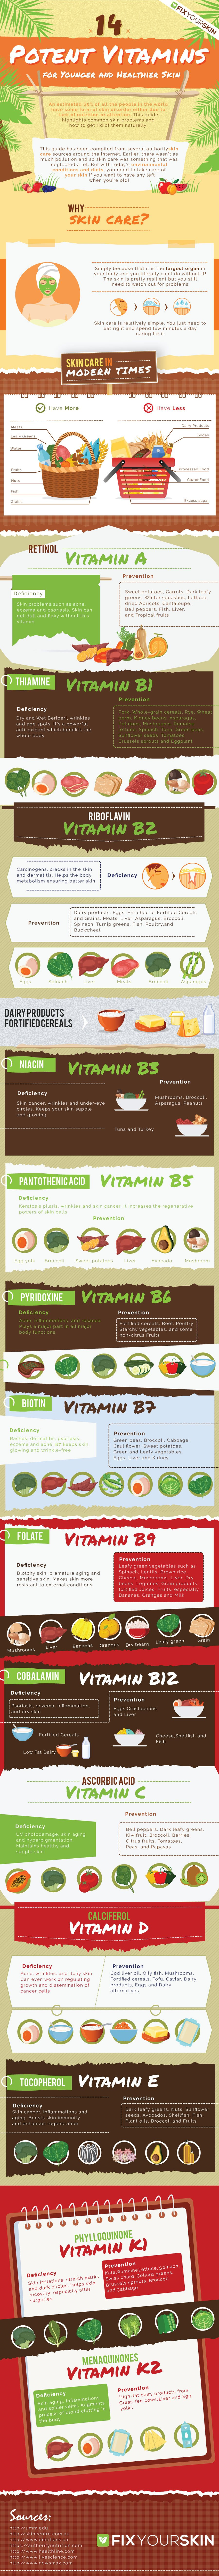 14 Potent Vitamins for Younger and Healthier Skin